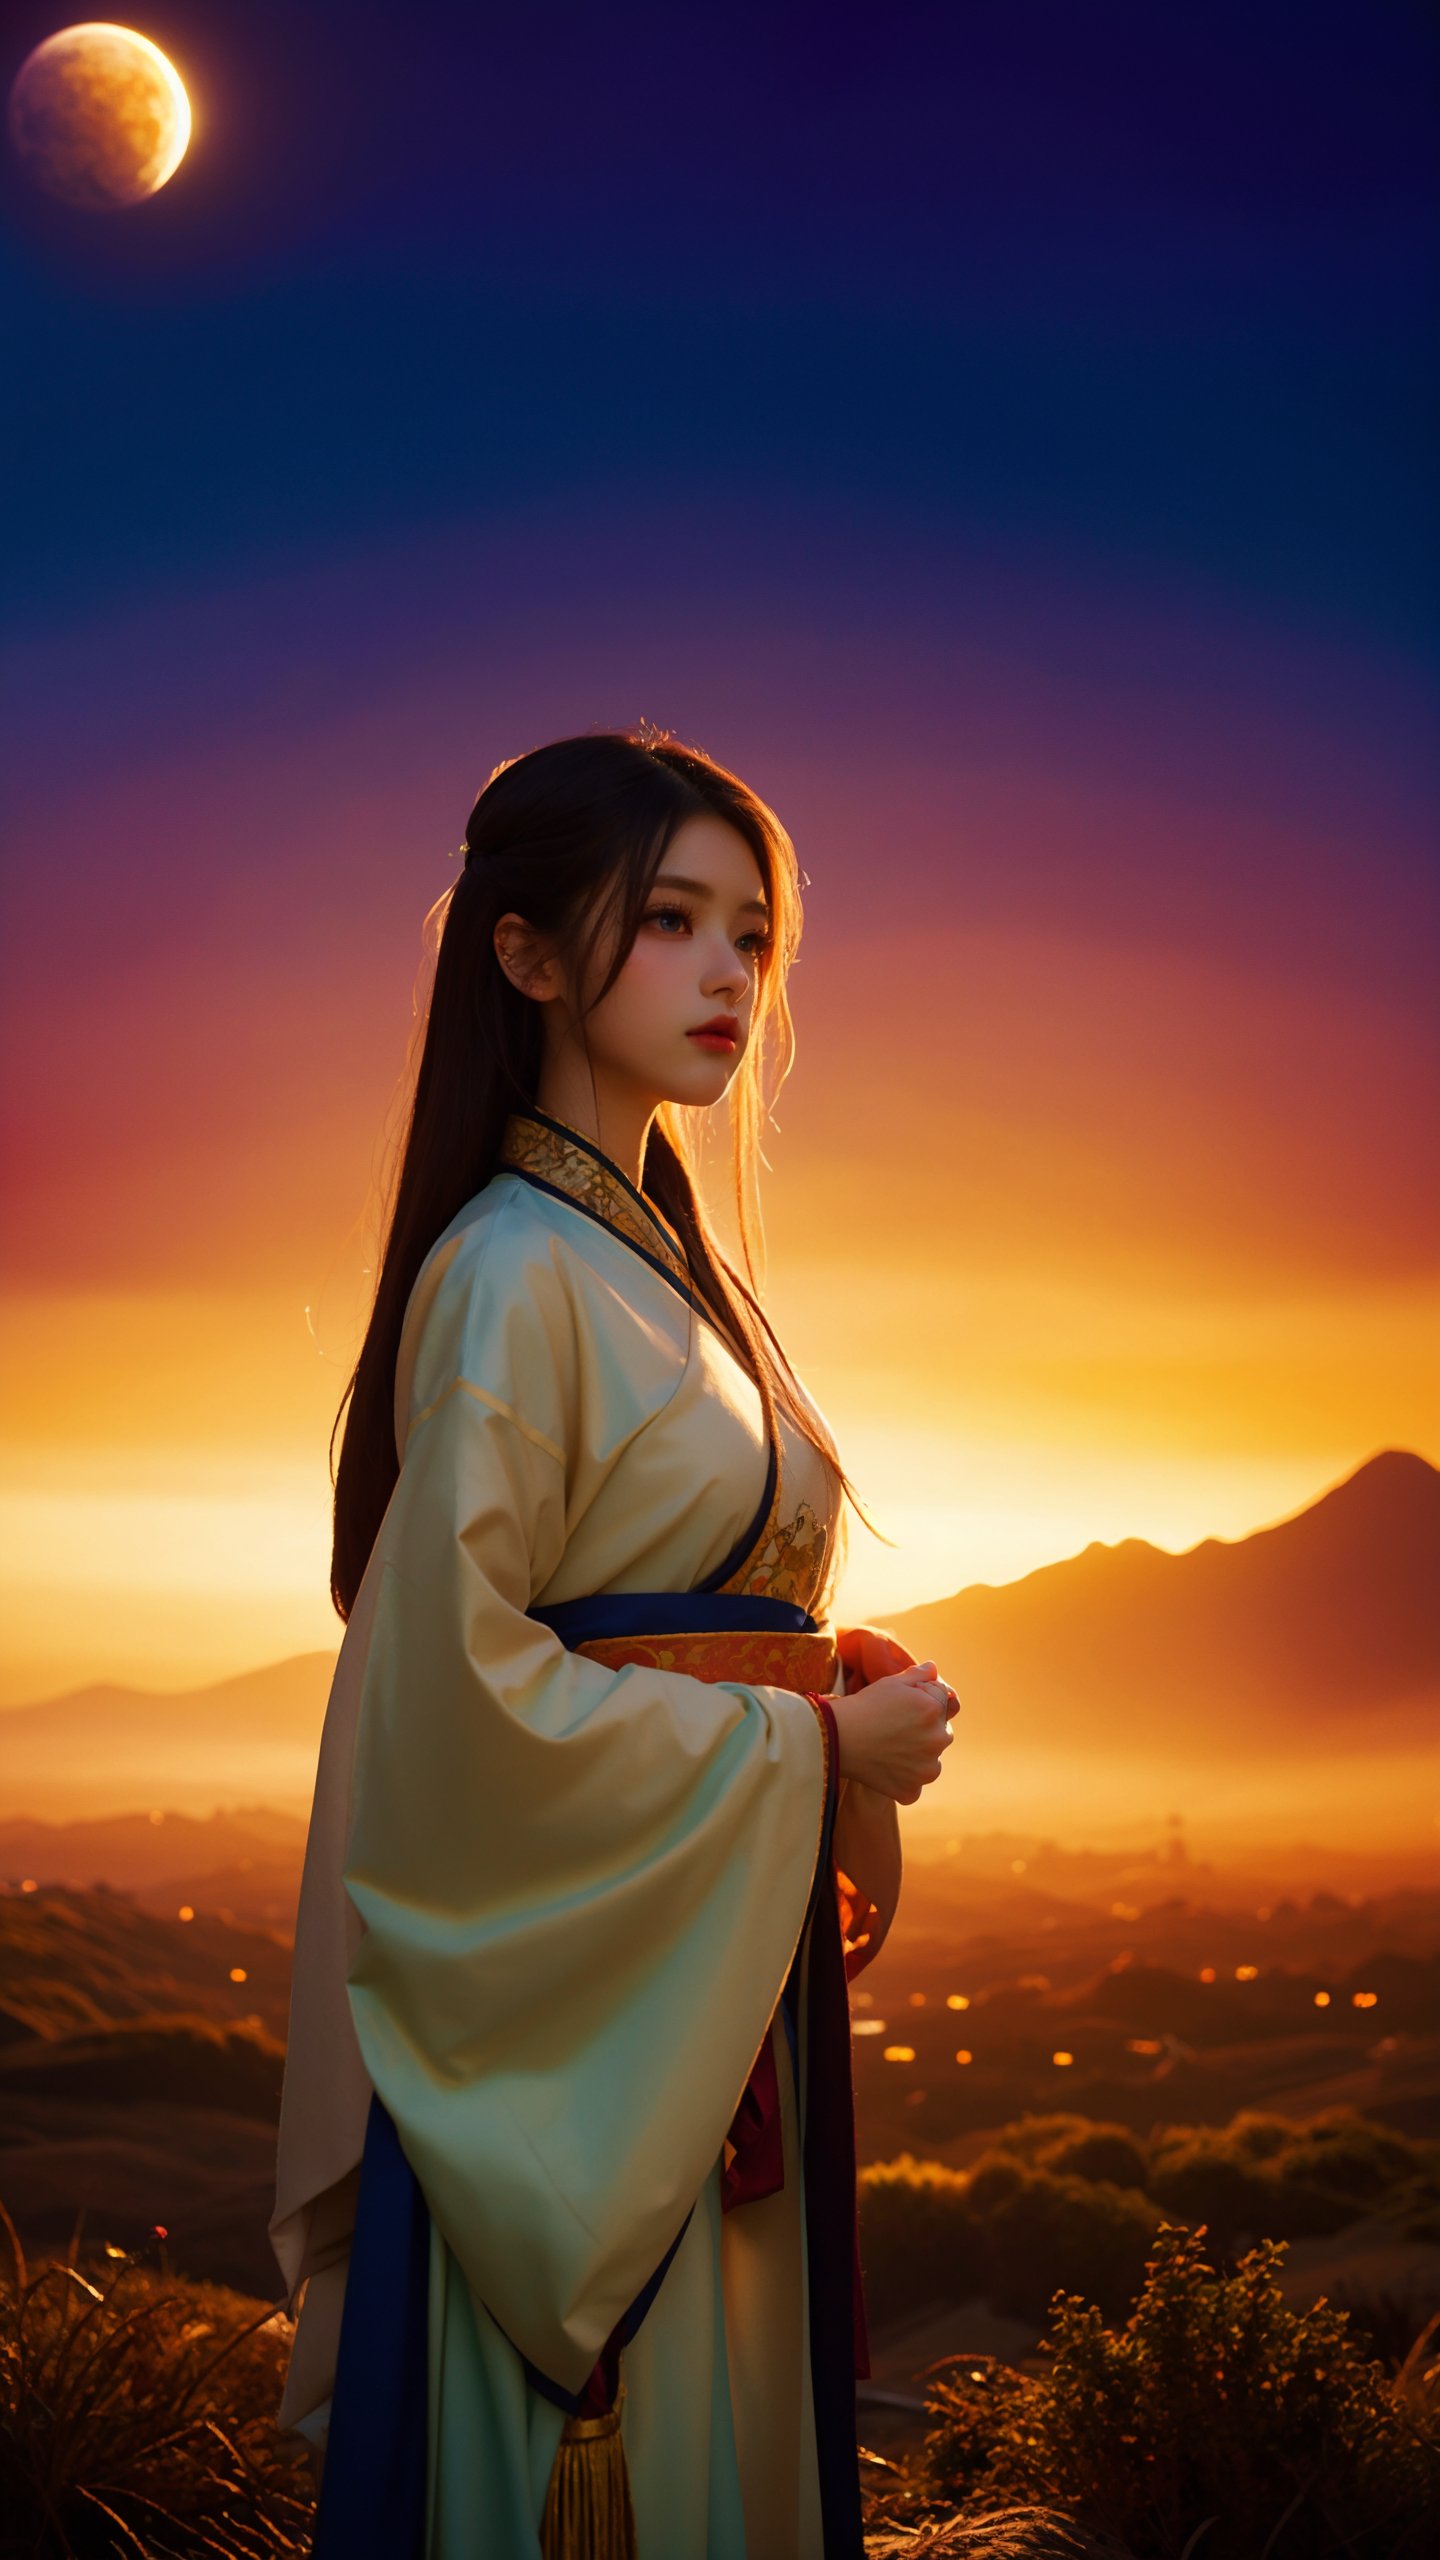 masterpiece, best quality, super wide angle, best fingers, facing viewer, full frontal, magnificent, celestial, ethereal, painterly, epic, majestic, magical, fantasy art, cover art, dreamy, elegant, cinematic, background illuminated, rich deep colors, ambient dramatic atmosphere, creative, perfect, beautiful composition, intricate, detailed1girl, hanfu, 